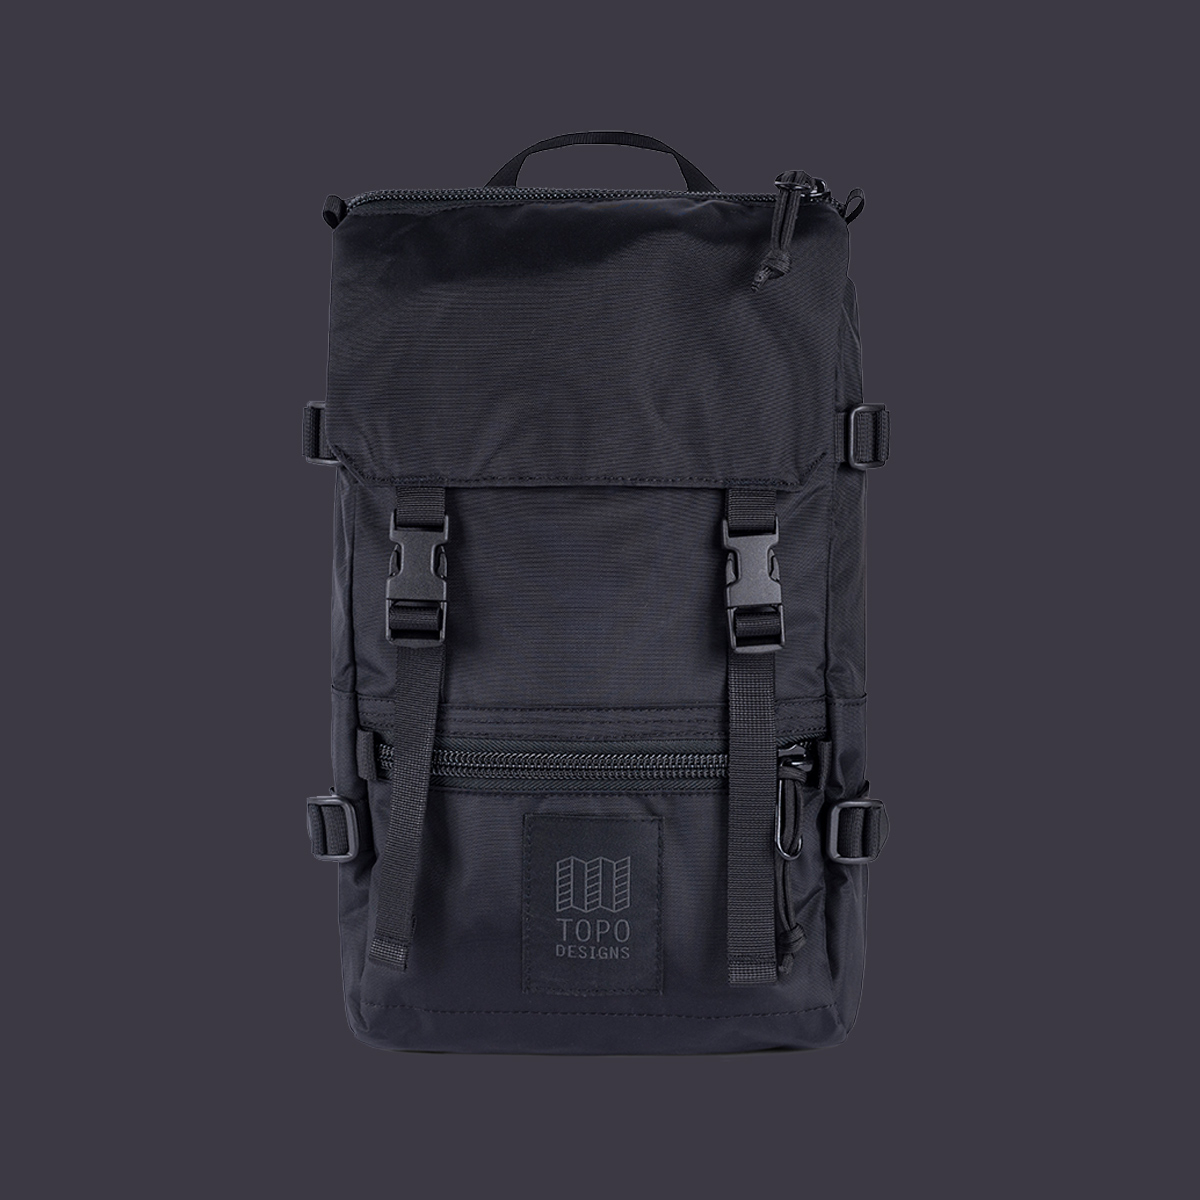 Topo Designs Rover Pack - Mini Black-Black, statement-making bag that’s the perfect size for errands around town or on the trail